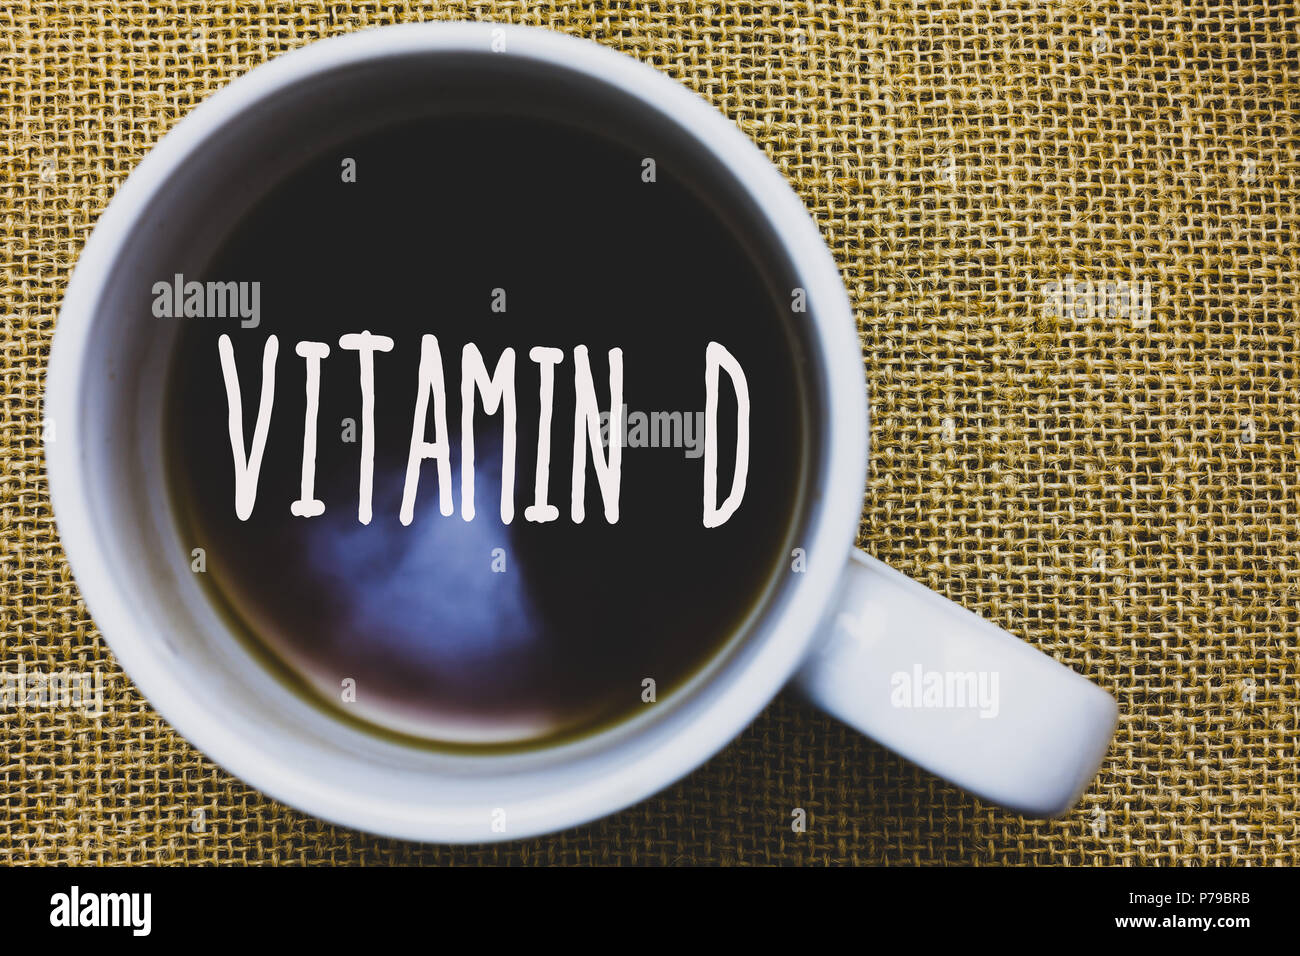 https://c8.alamy.com/comp/P79BRB/handwriting-text-writing-vitamin-d-concept-meaning-benefits-of-sunbeam-exposure-and-certain-fat-soluble-nutriments-mug-coffee-thoughts-ideas-creative-P79BRB.jpg